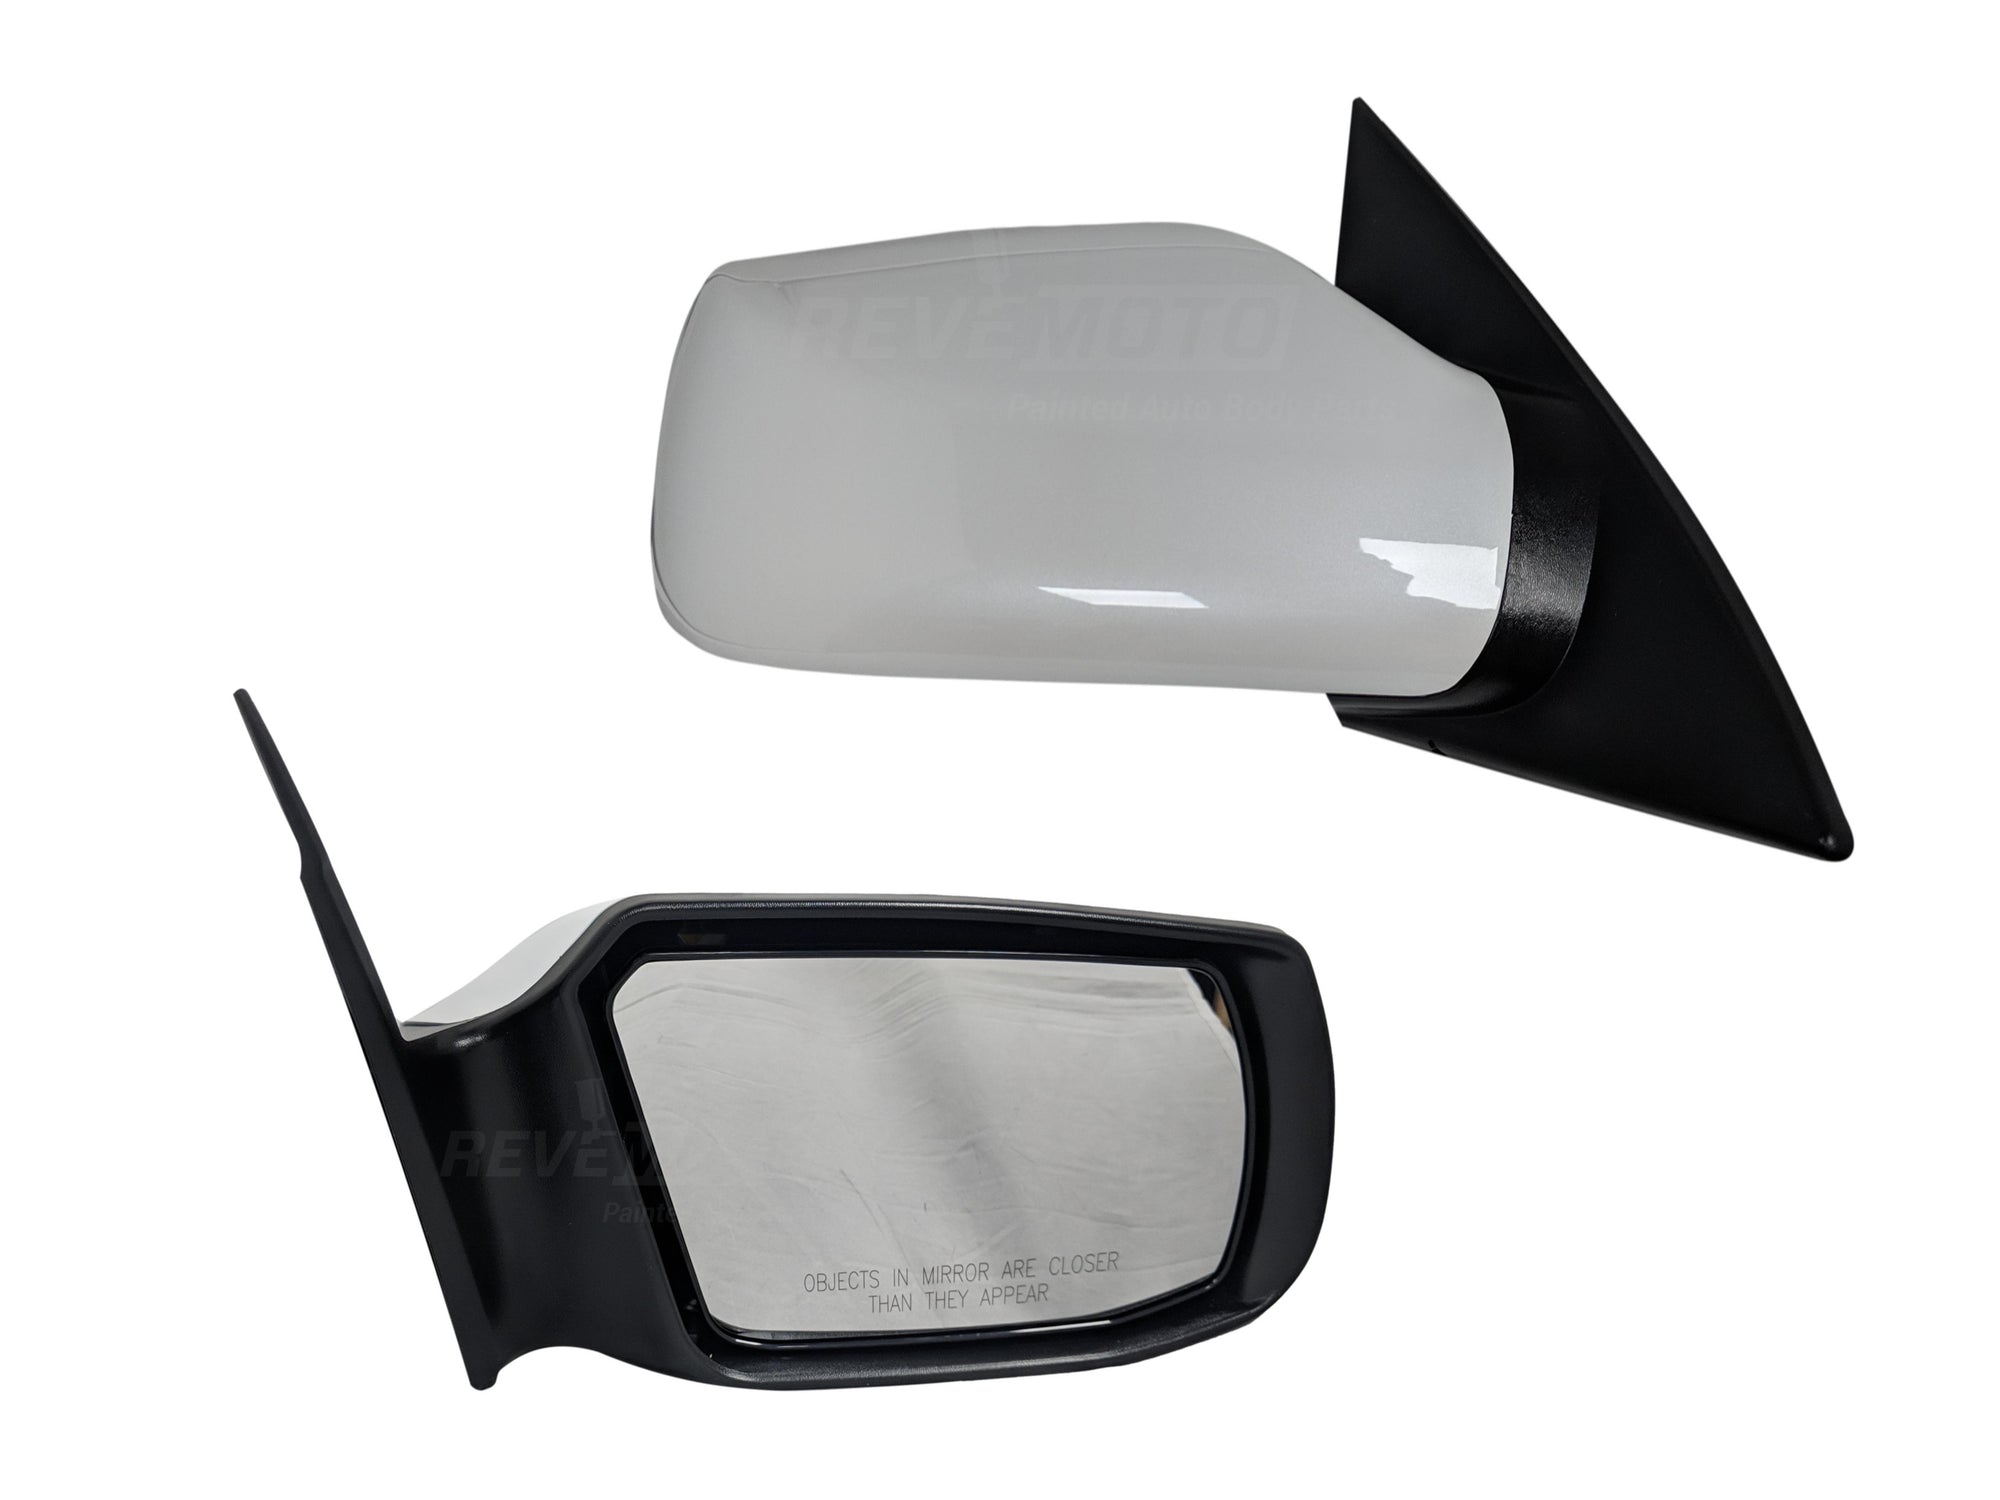 2008 Nissan Altima Passenger Side View Mirror, Without Heated Glass, Without Signal Lamp, 2.5 Liter, Sedan, 4 Door, PaintedSatin White Pearl (QX3) 96301JA04A NI1321163